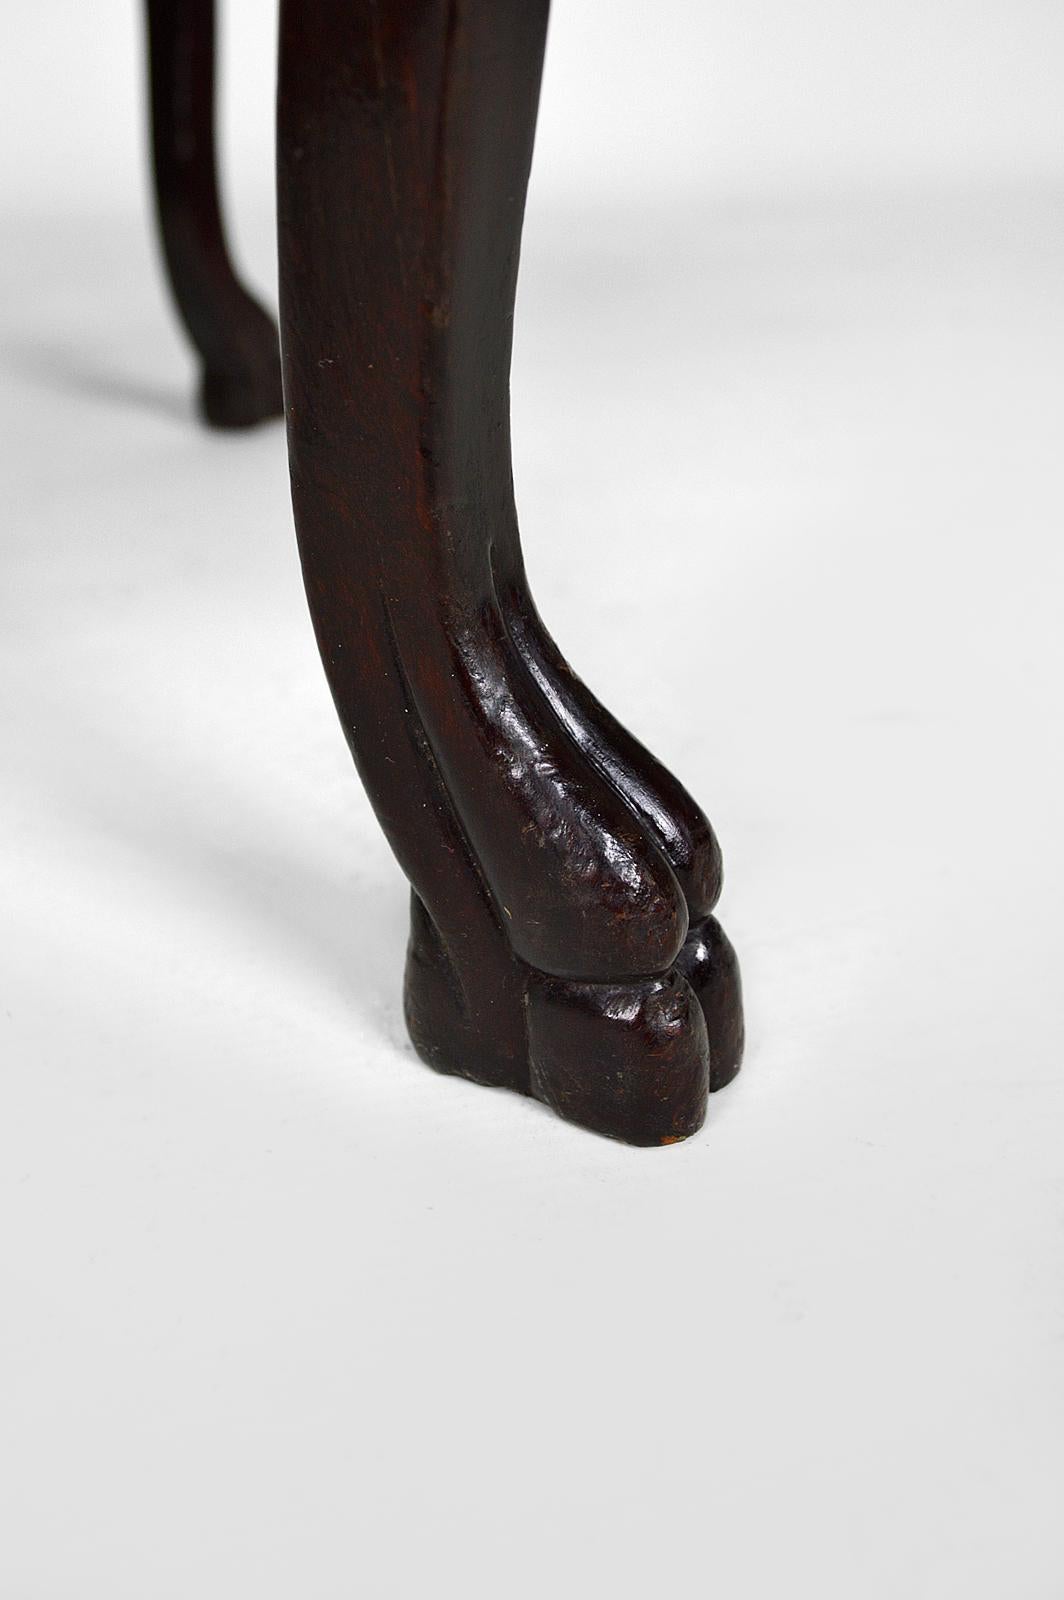 Pedestal Table in Carved Wood and Lacquered Panels, Japonisme France, circa 1880 For Sale 14